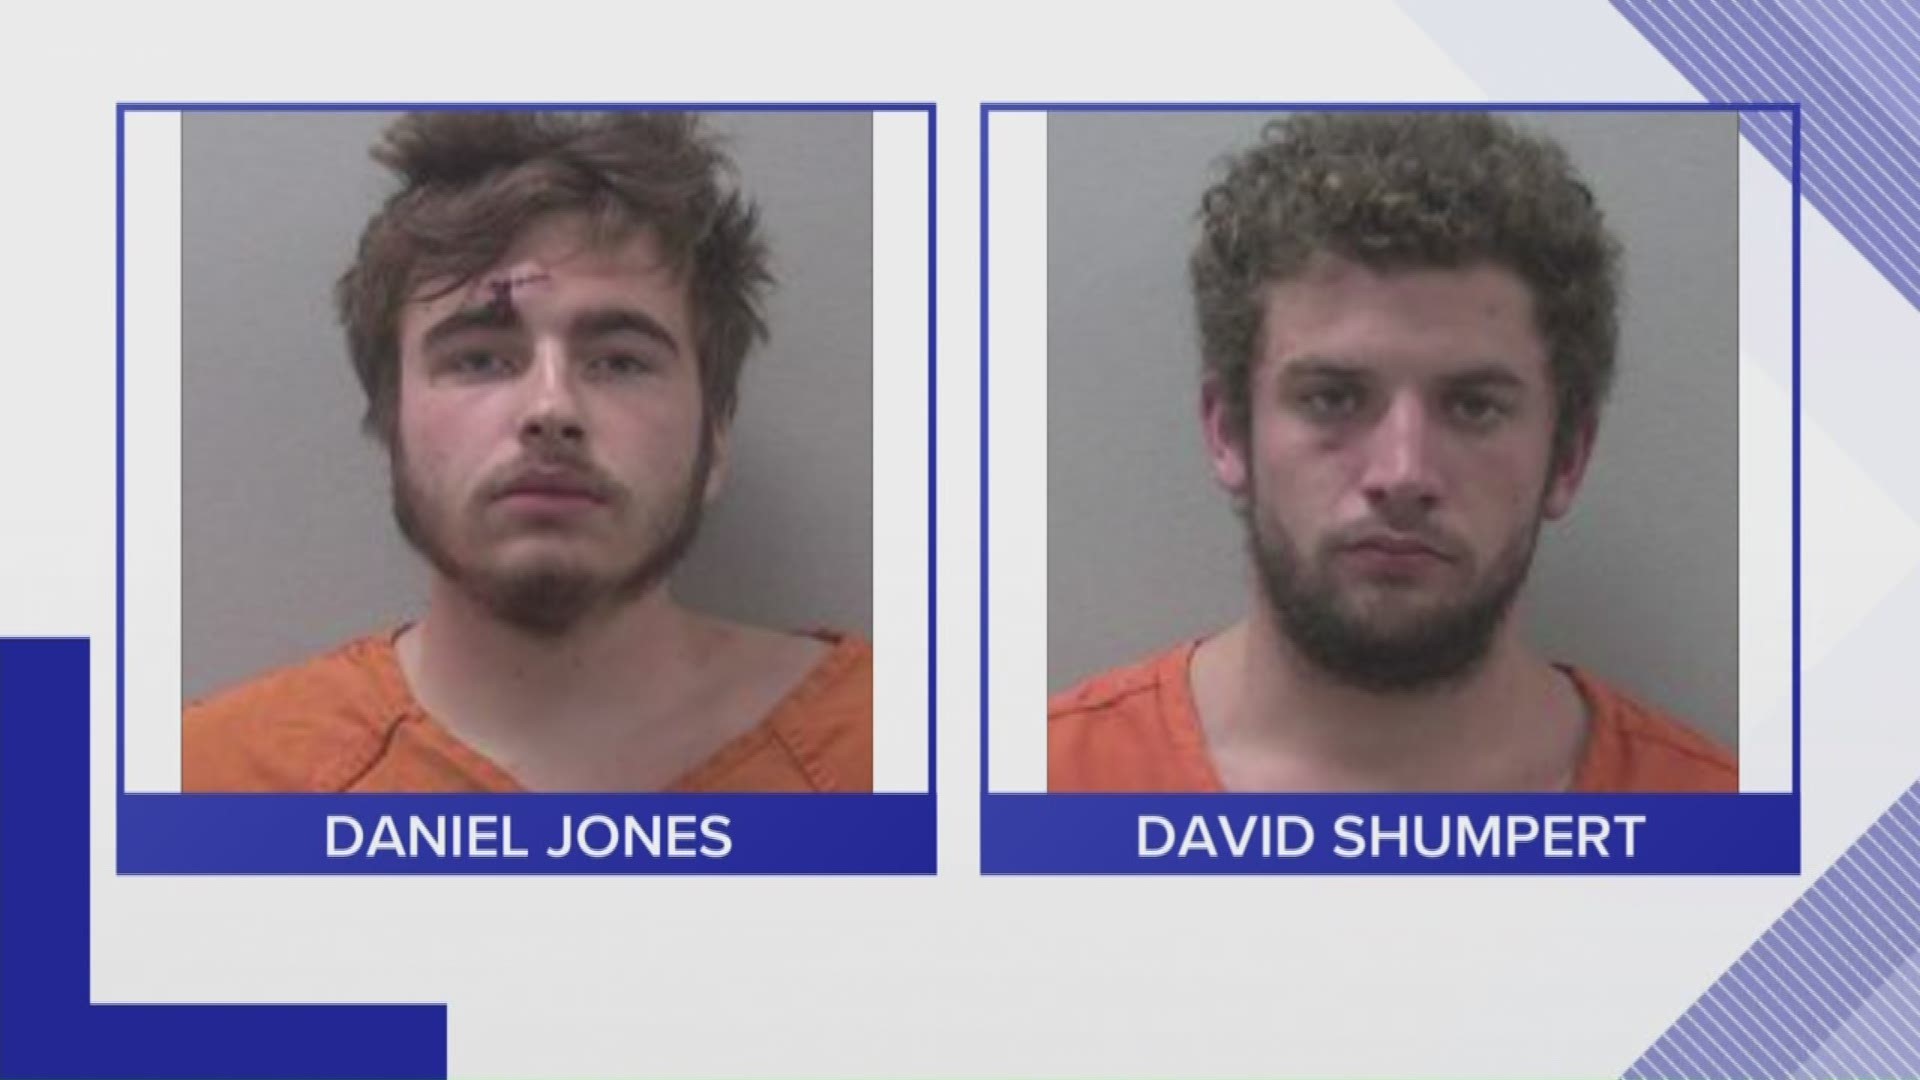 The pair are accused of firing multiple shots near Gaston, which led to the death of one man, deputies say.